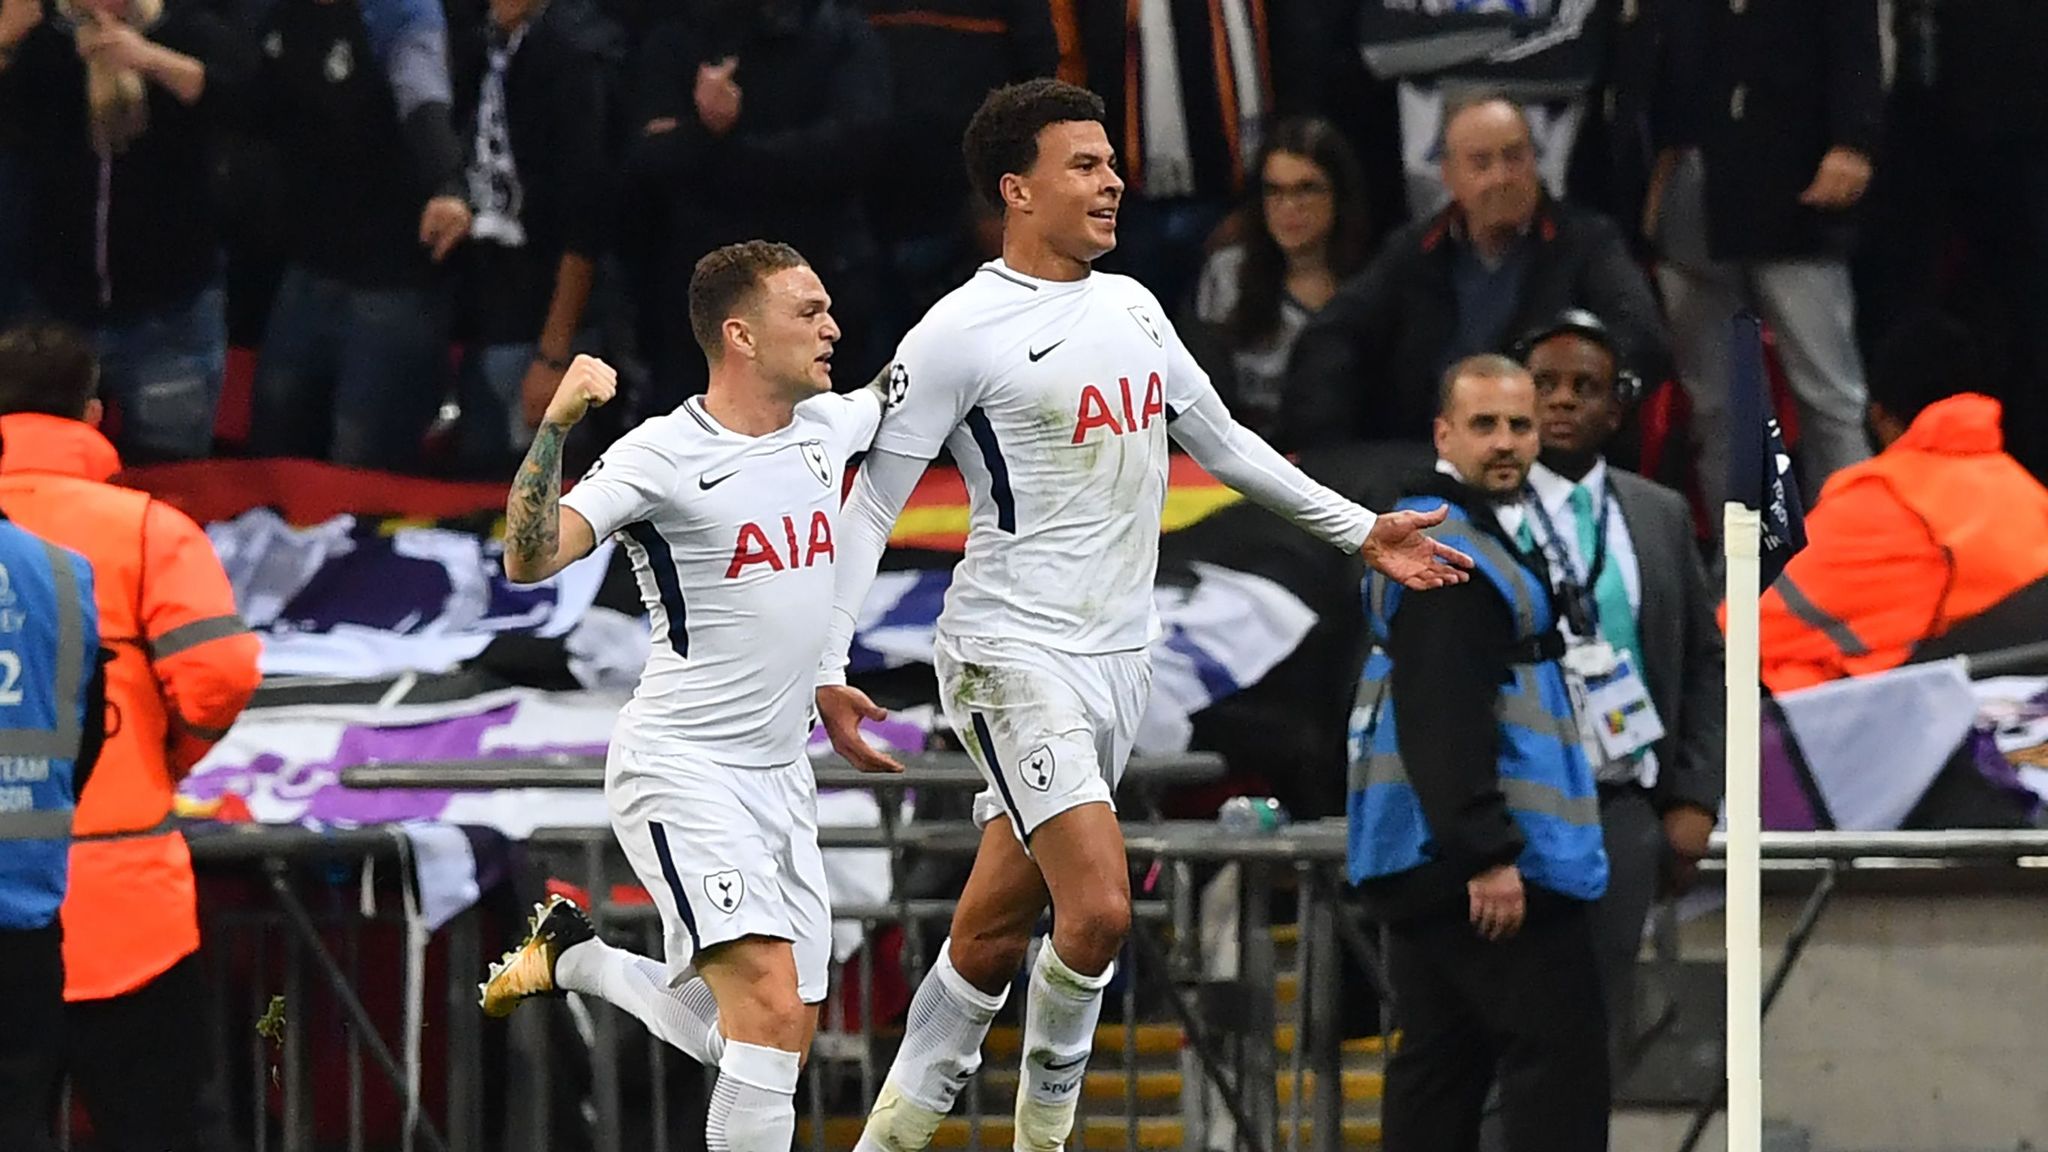 Tottenham 3 1 Real Madrid Spurs Qualify For Last 16 With Famous Win Football News Sky Sports